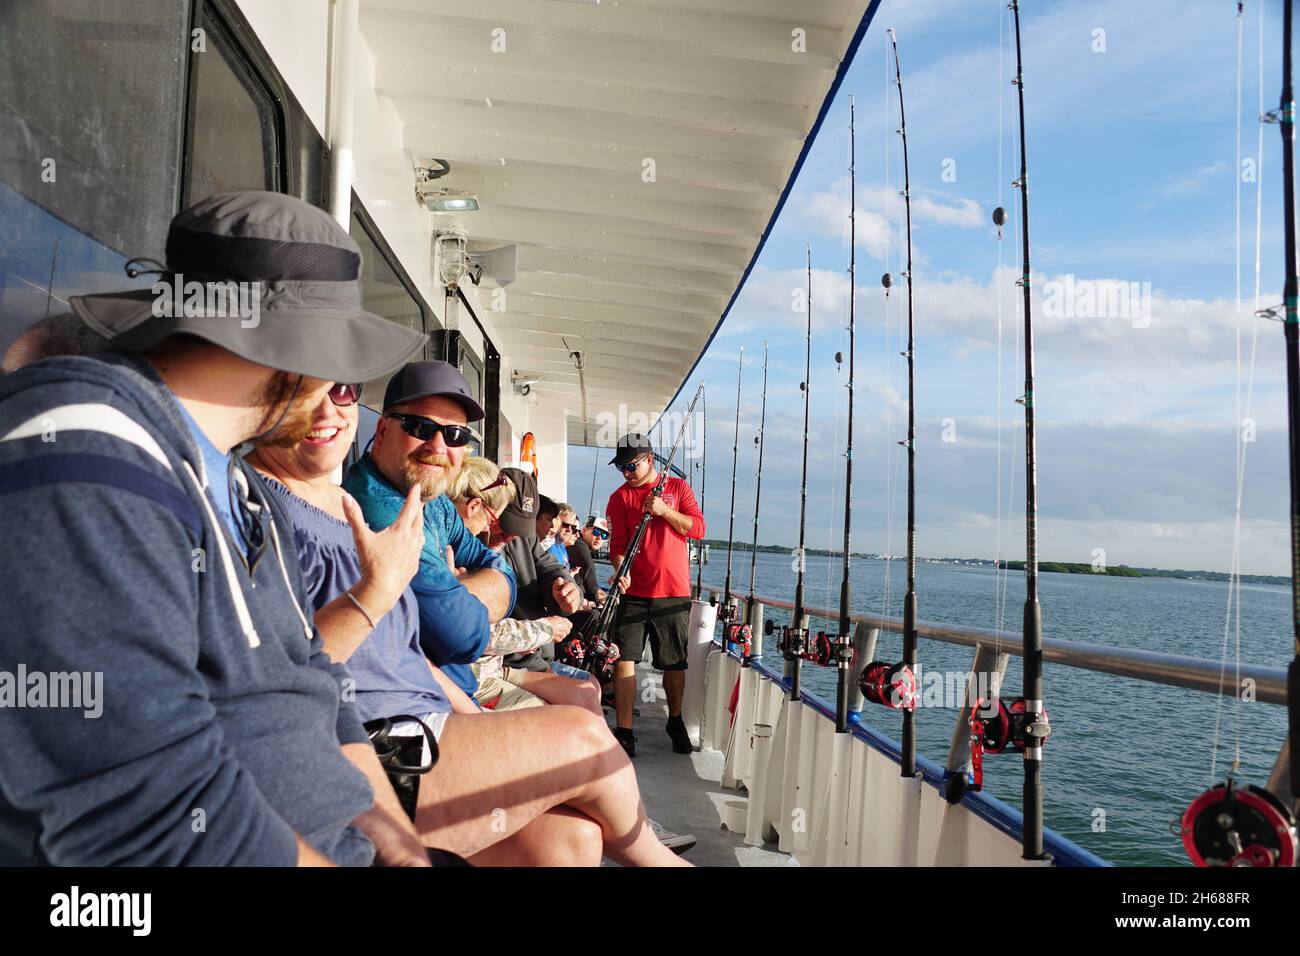 Madeira Beach, Florida, U.S.A - November 10, 2021 - A group of people on the deepsea fishing boat Stock Photo